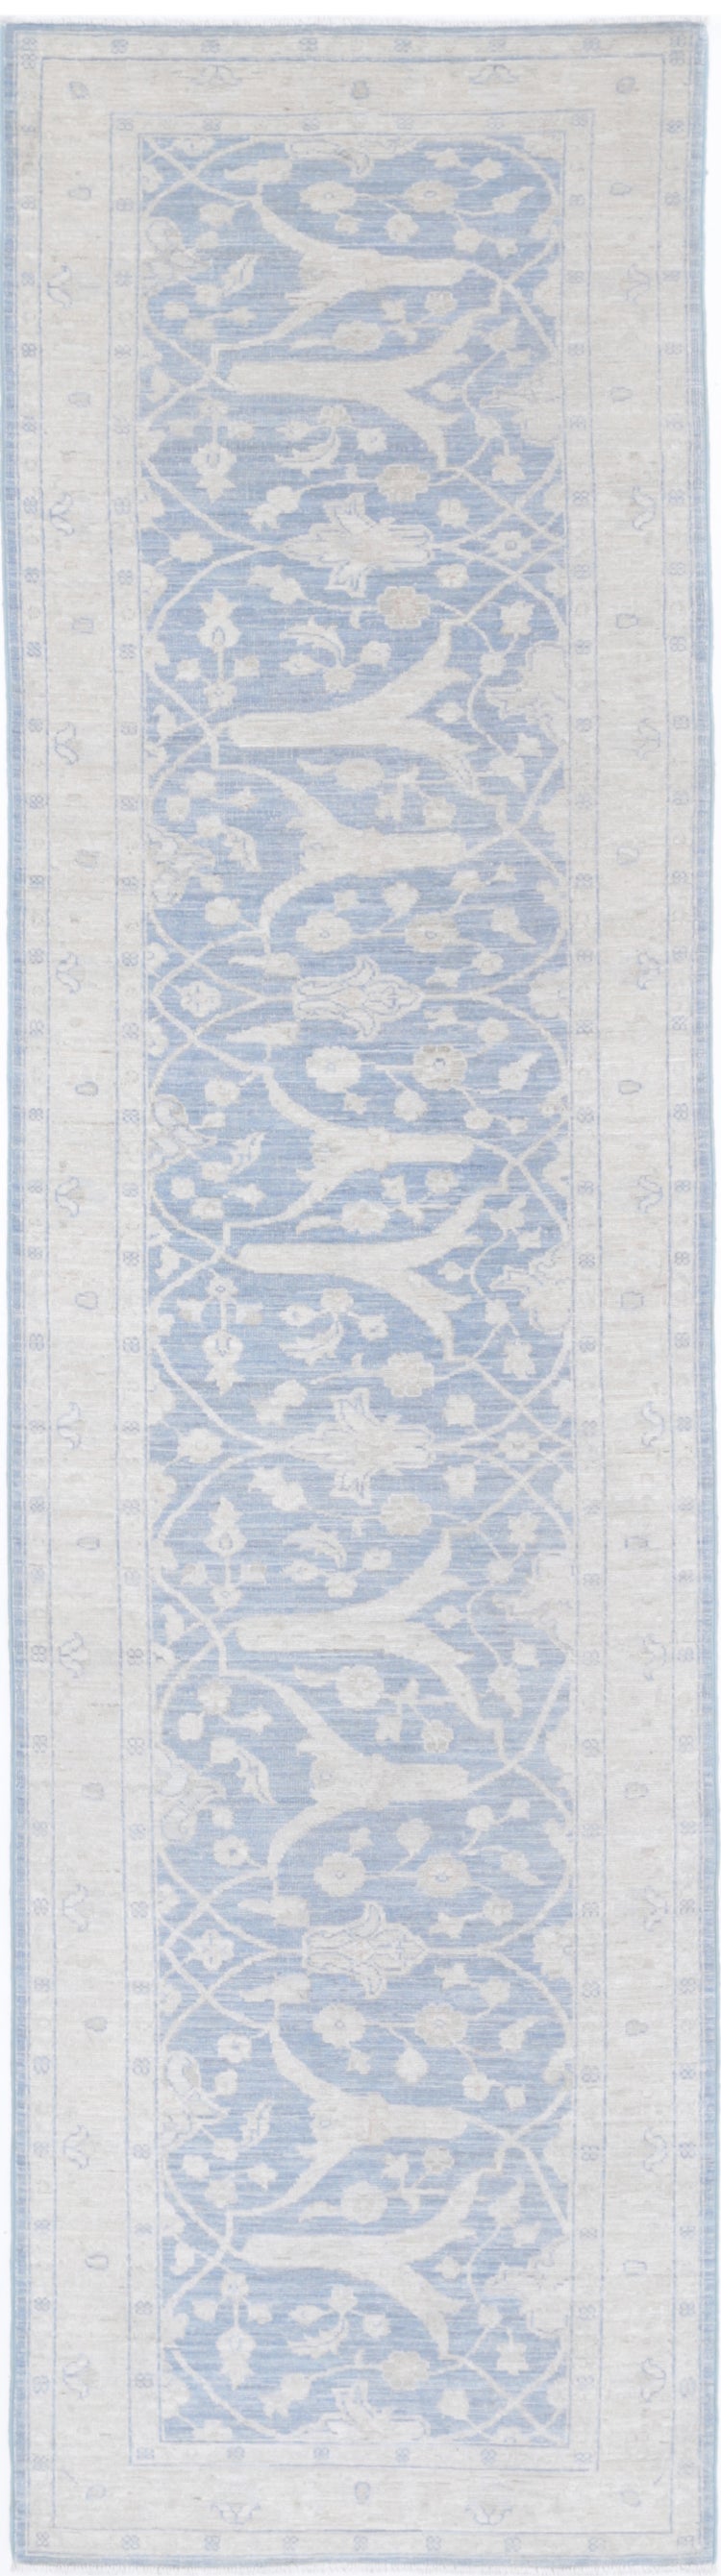 Traditional Hand Knotted Serenity Tabriz Wool Rug of Size 2'5'' X 9'6'' in Blue and Ivory Colors - Made in Afghanistan